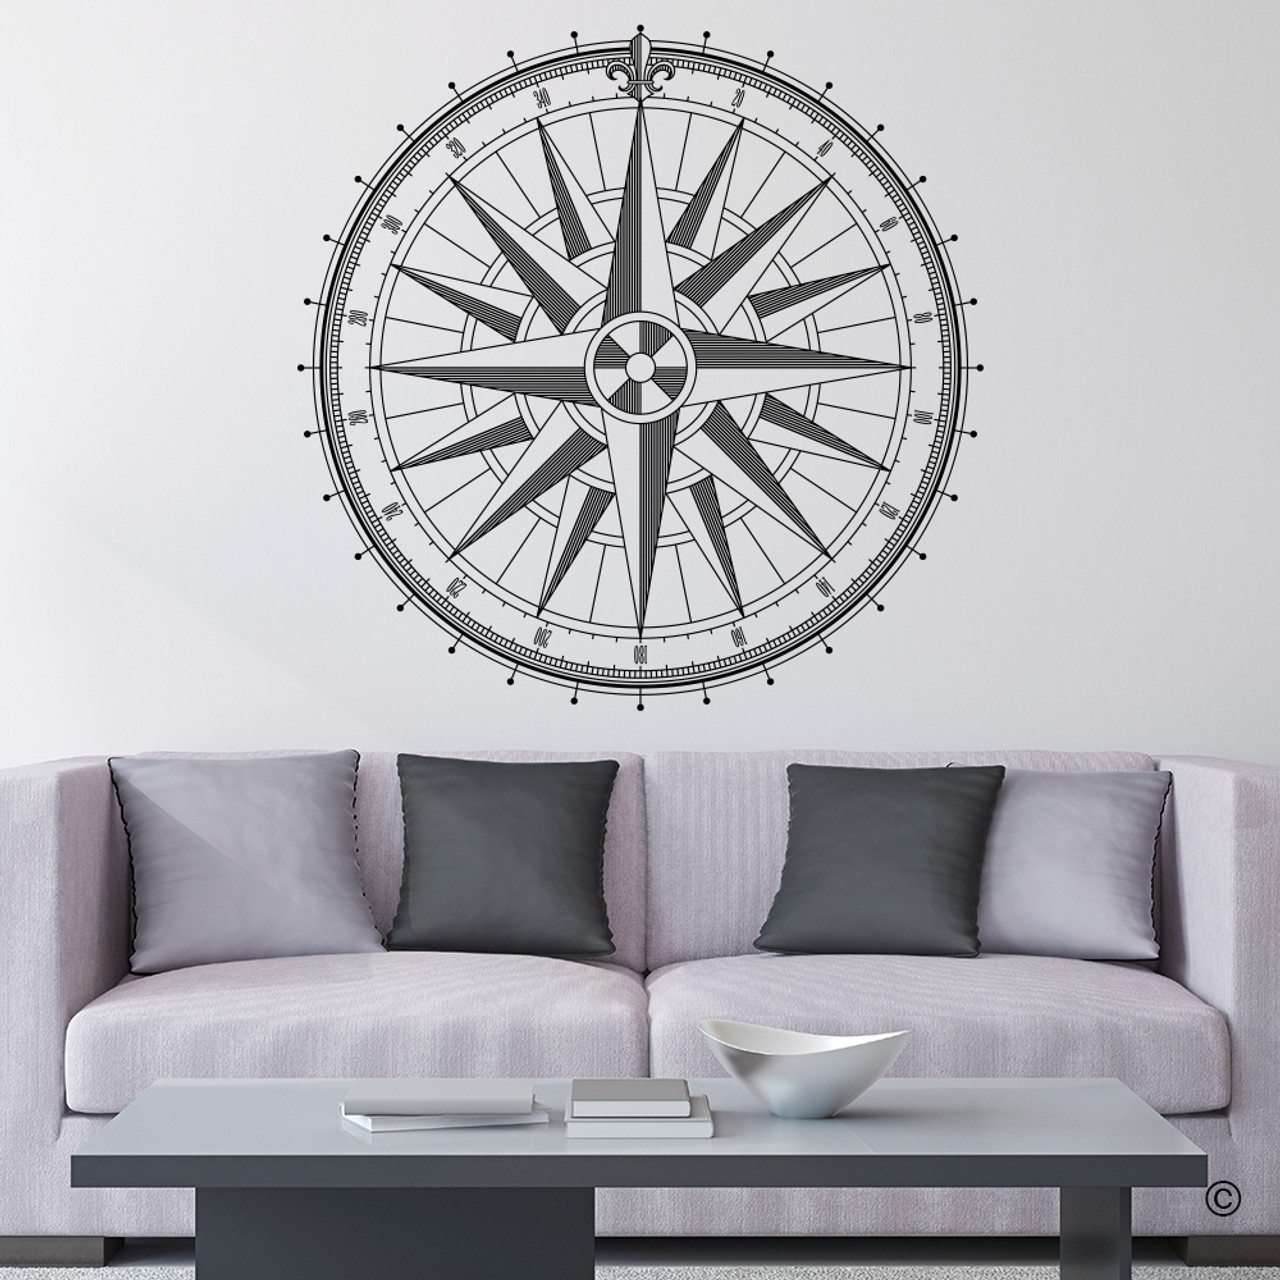 The Caspian Compass Wall Decal, shown here in black vinyl color on a living room wall. 